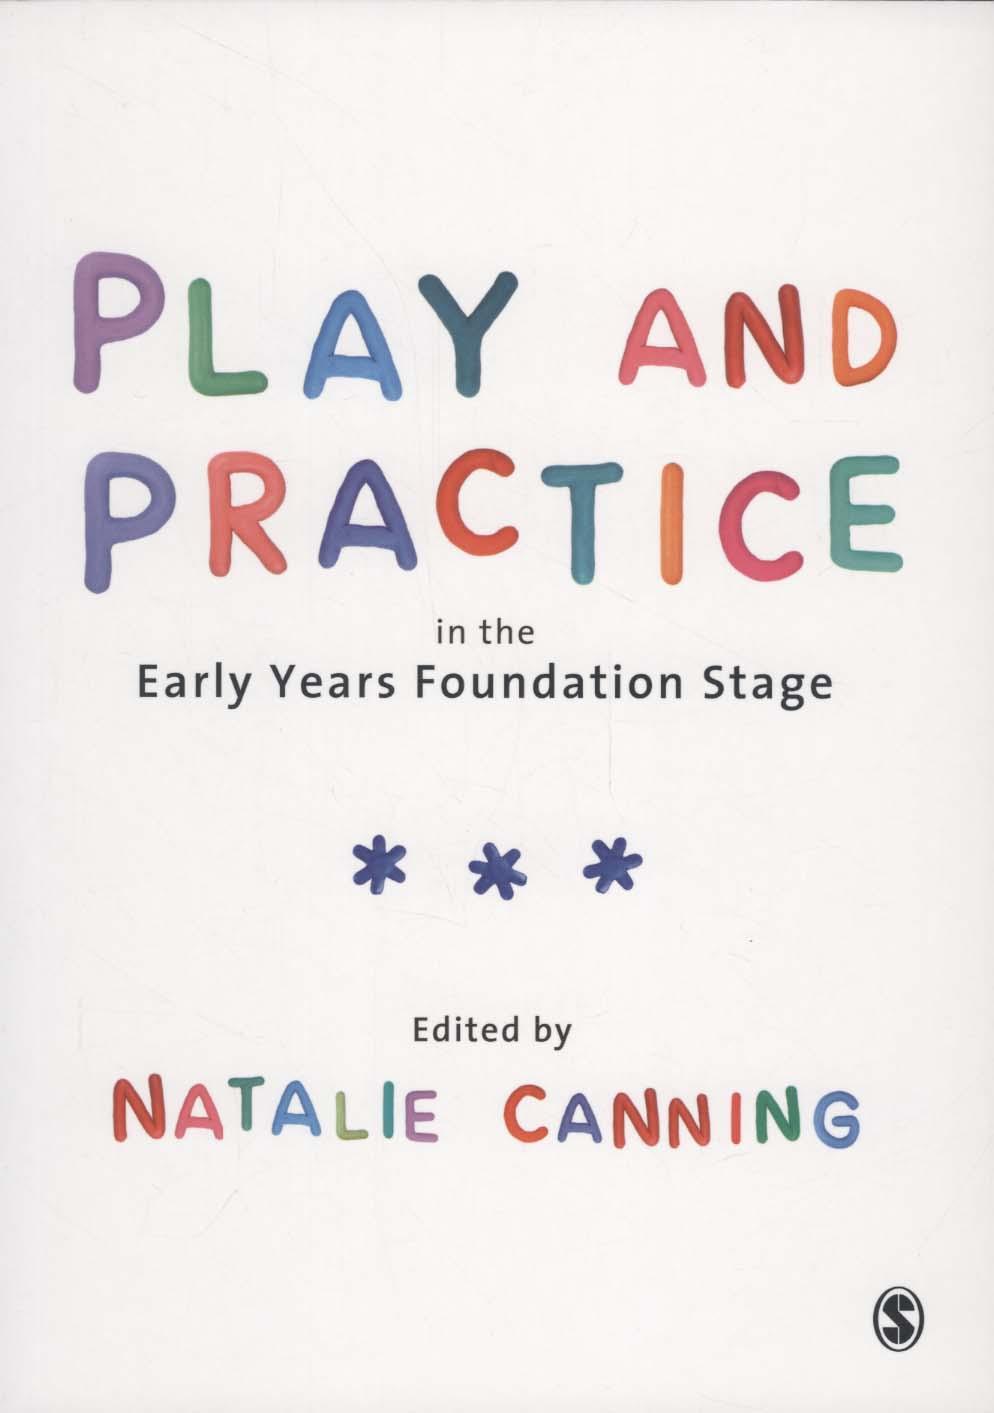 Play and Practice in the Early Years Foundation Stage - Natalie Canning